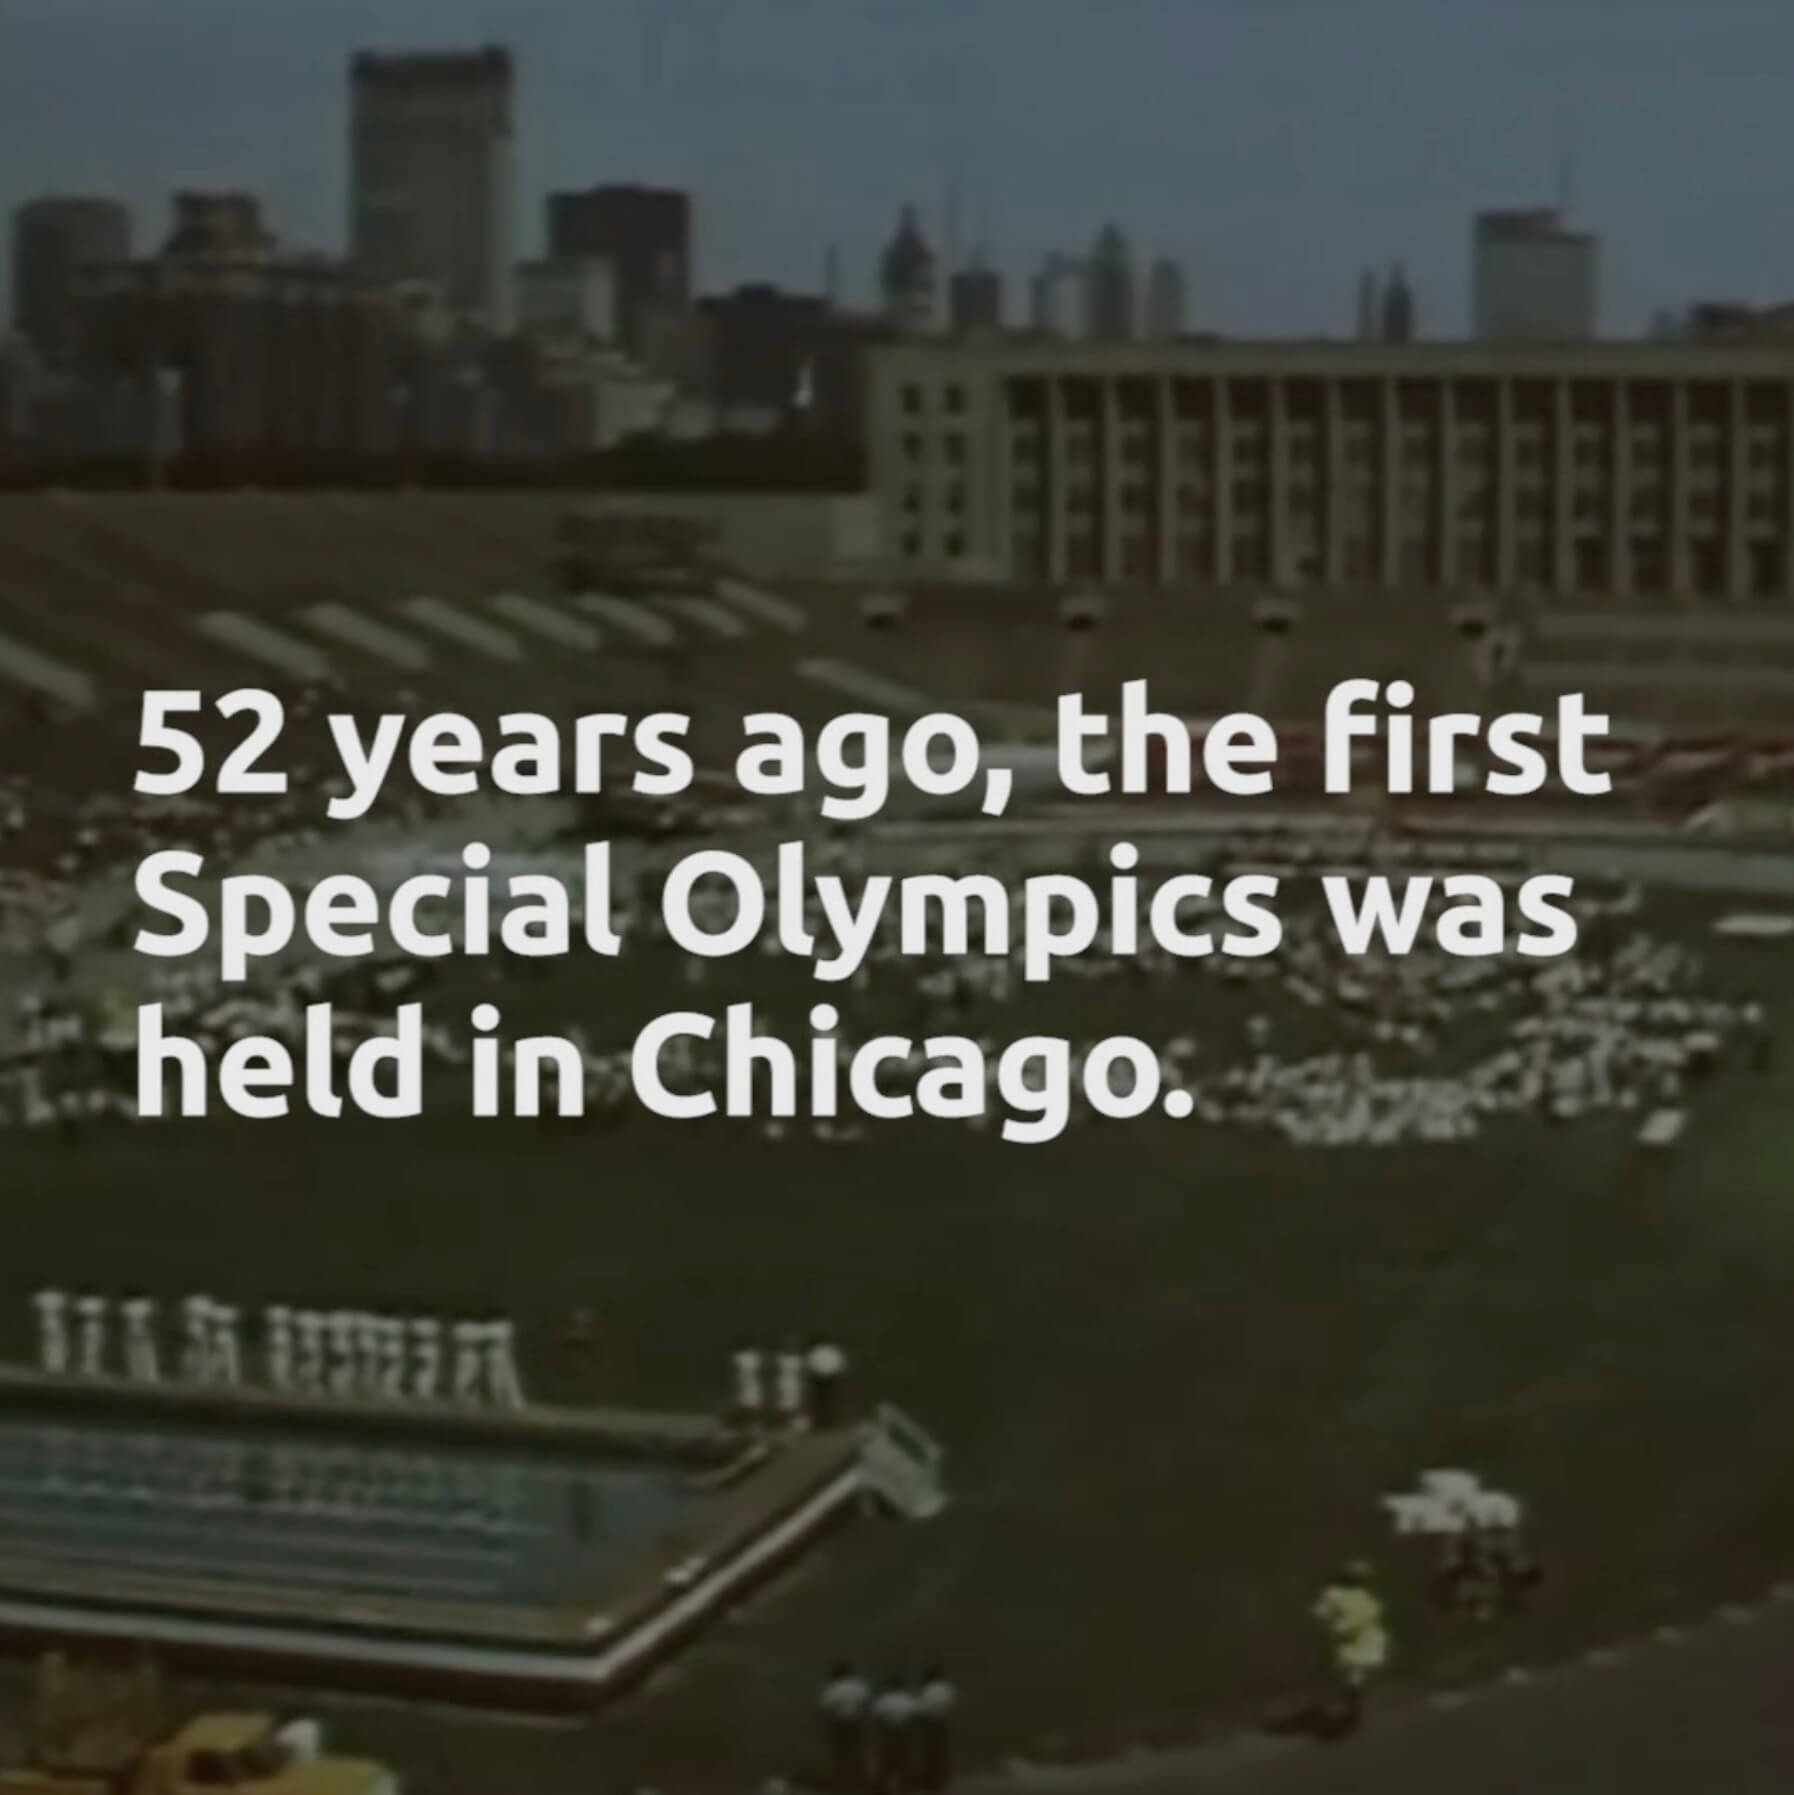 The first Special Olympics was held in Chicago.